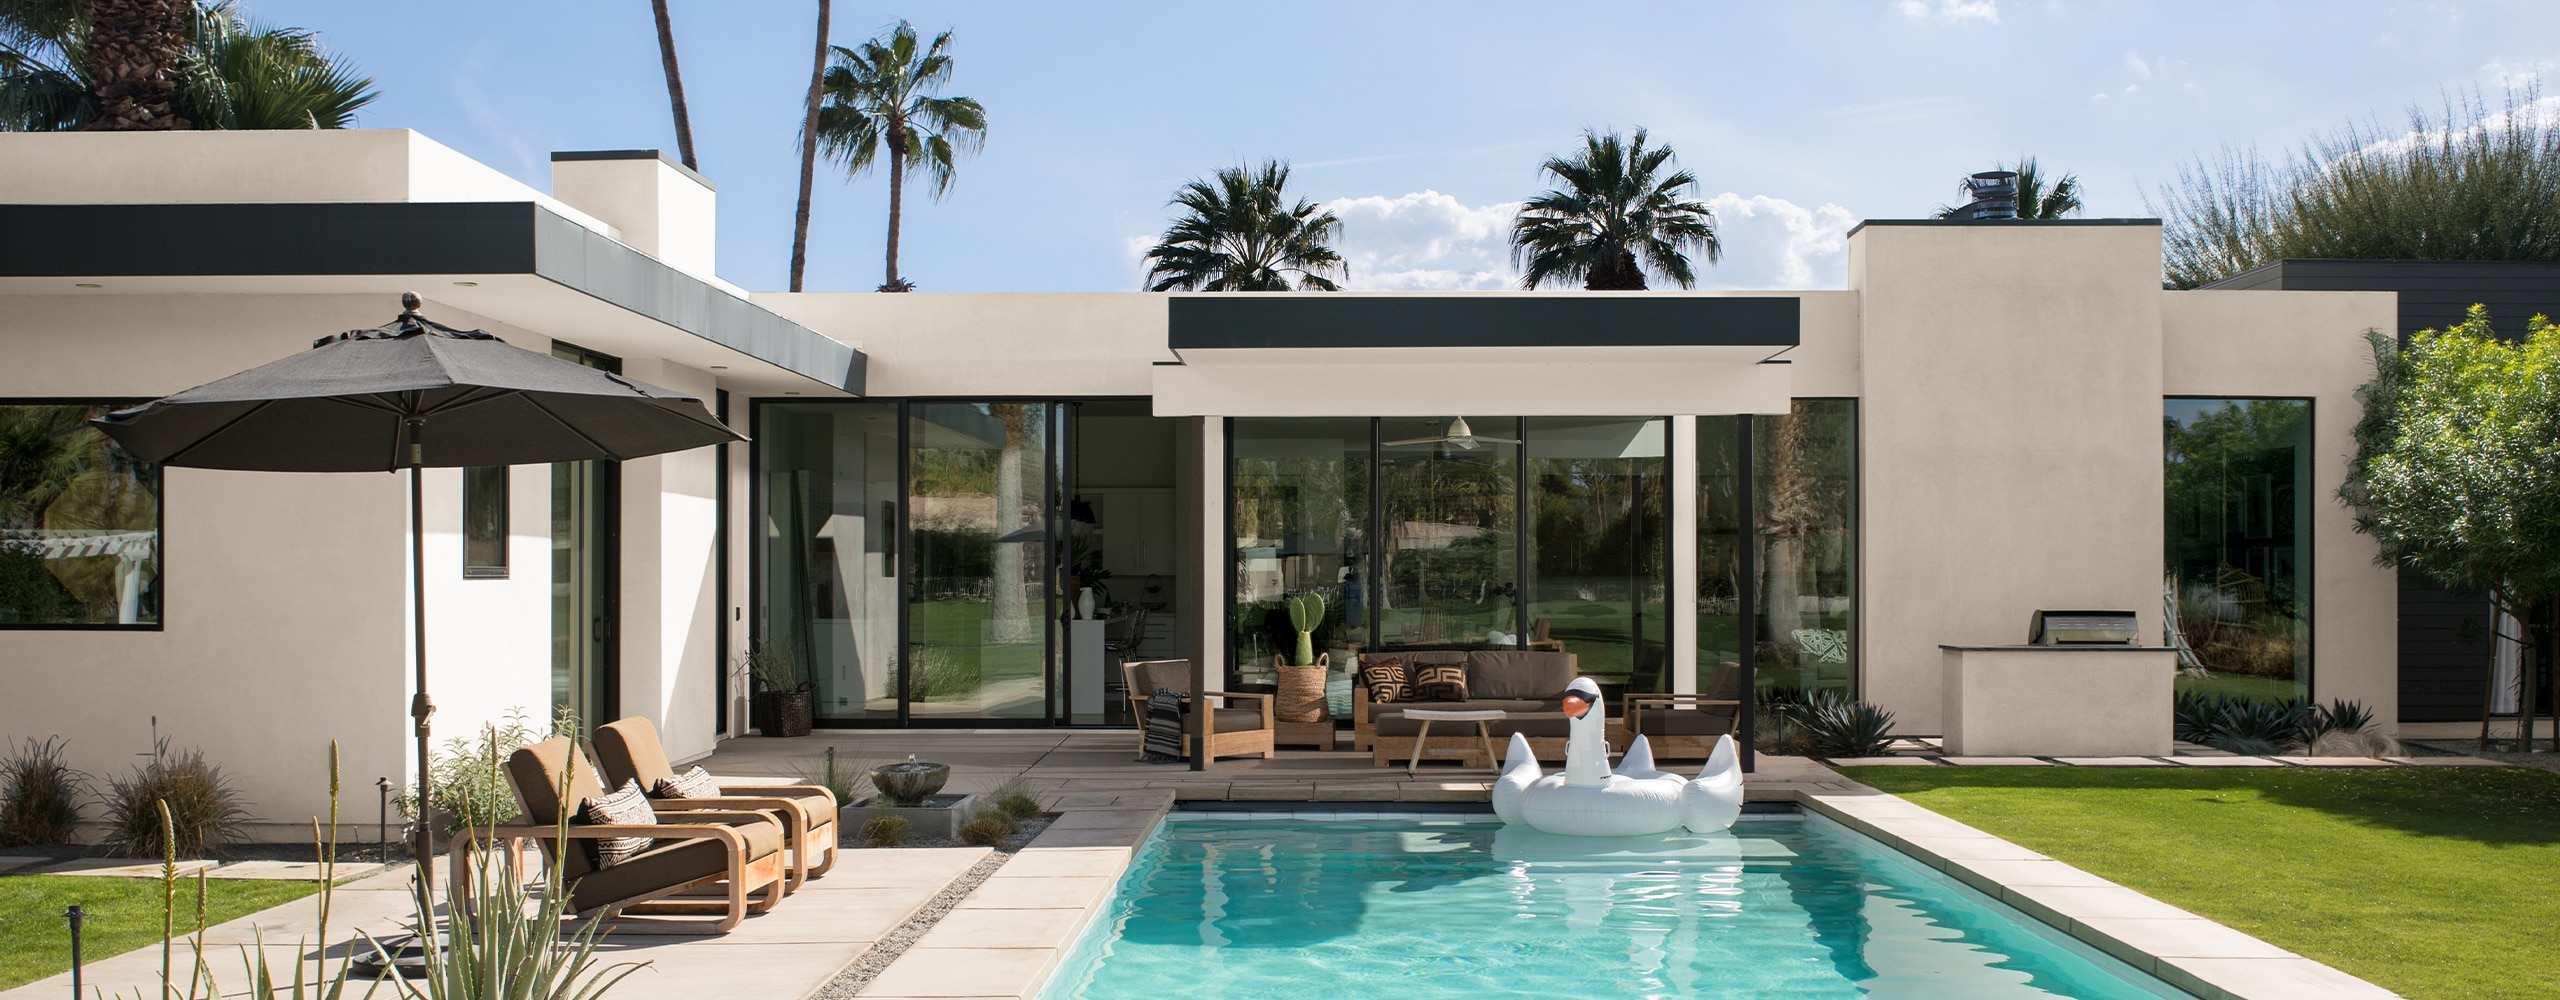 A modern, white-painted stucco house with black trim and palm trees features a beautiful backyard pool and patio.